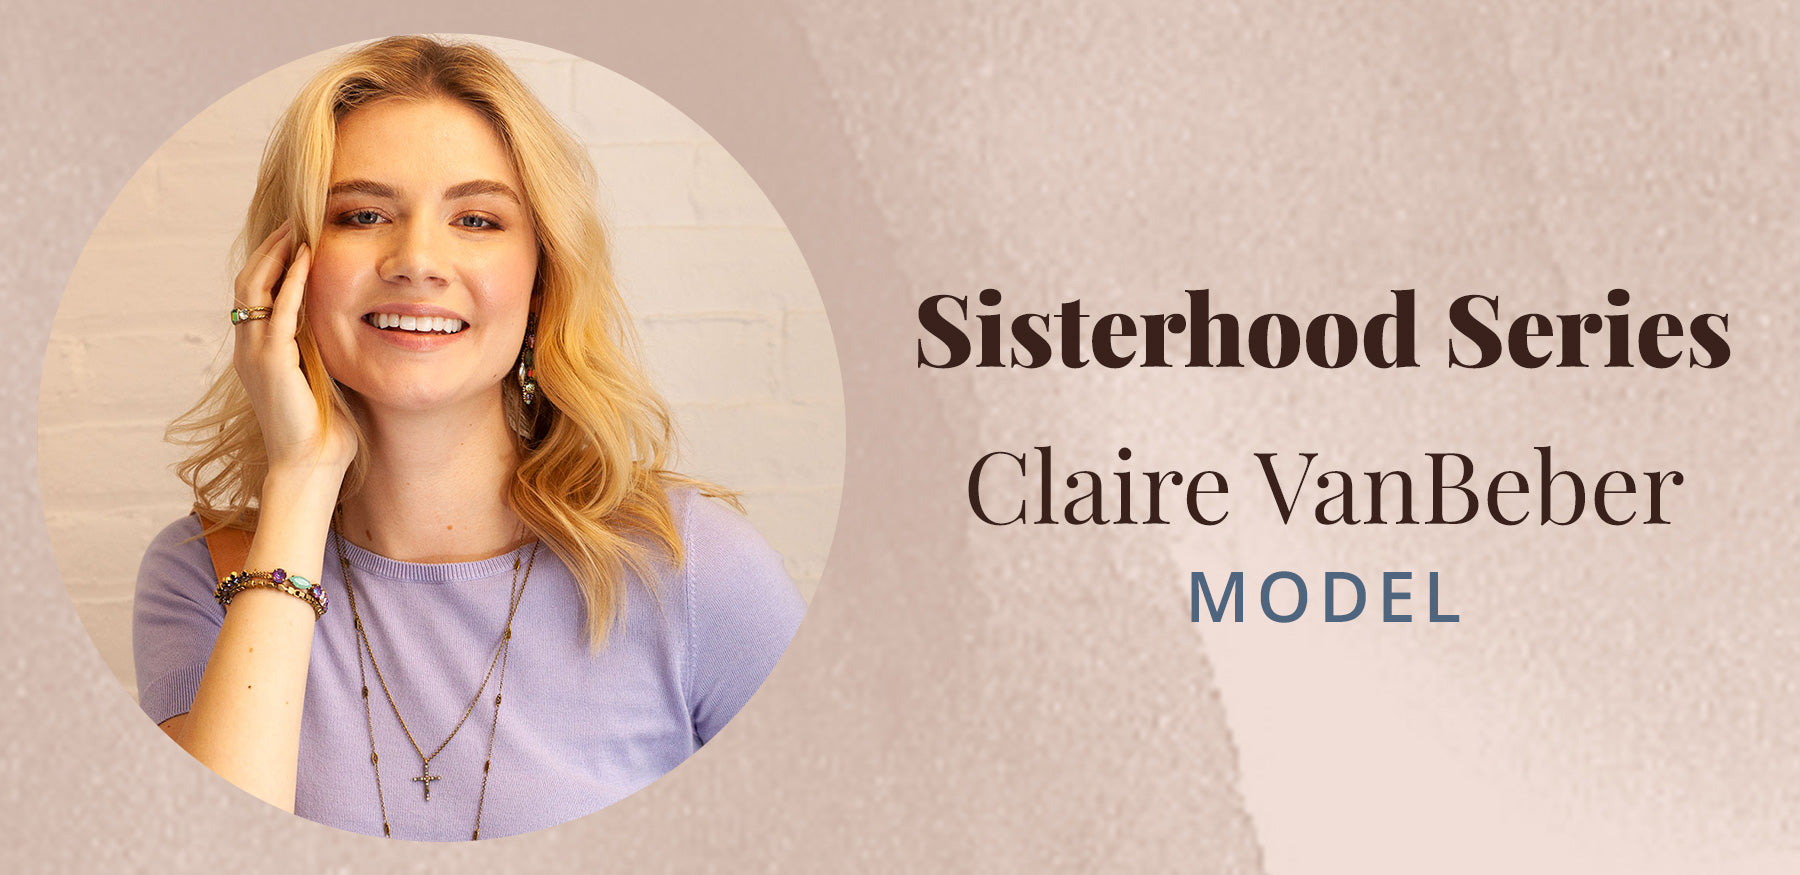 The Sisterhood Series with Claire Vanbeber